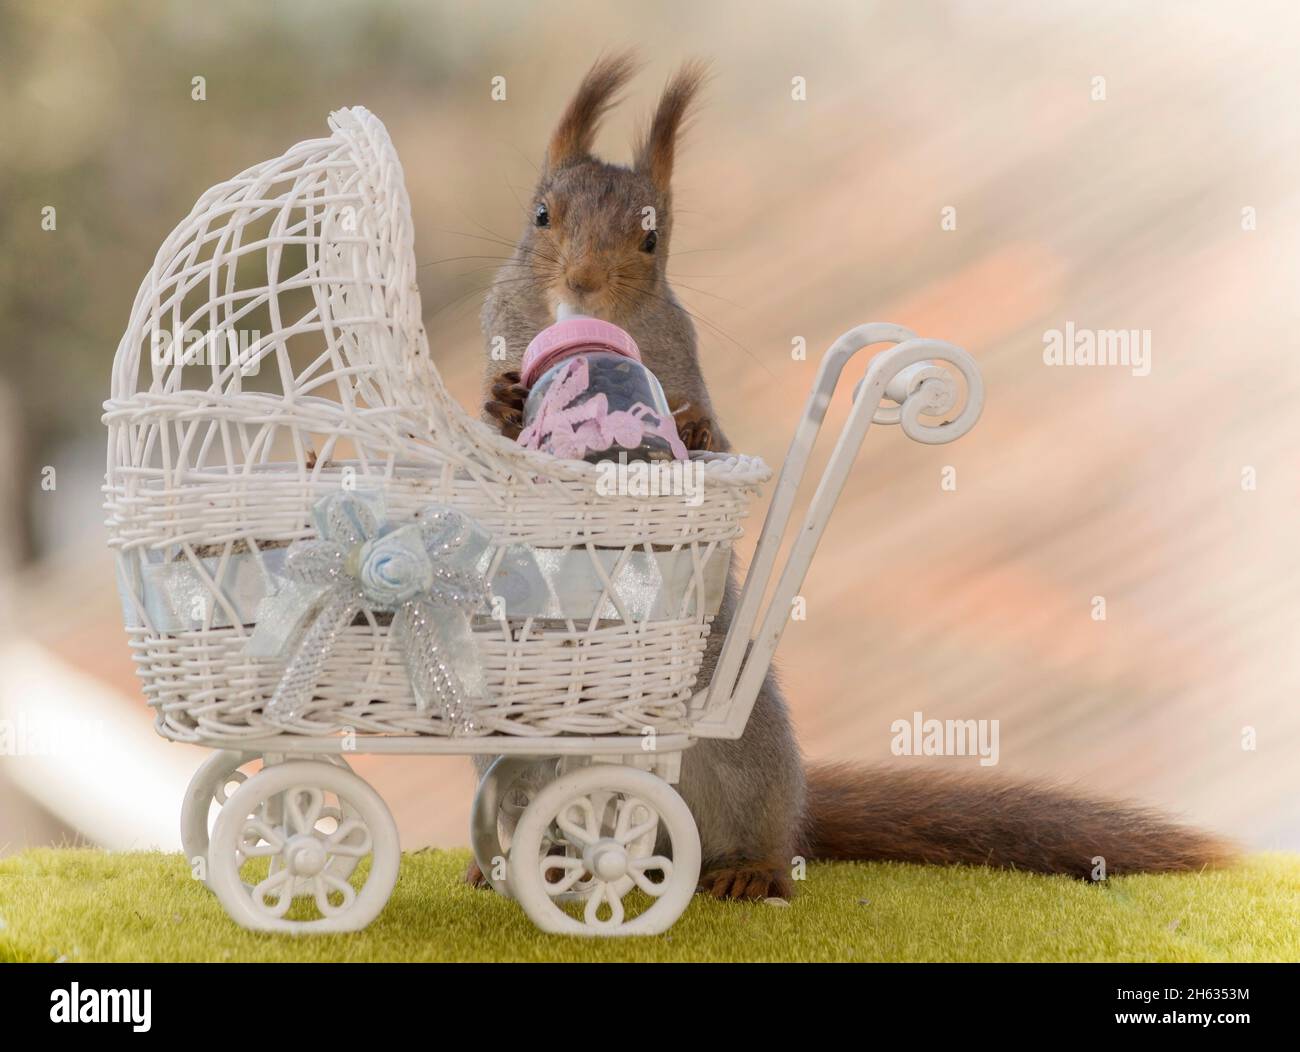 red squirrel with a pram holding a nursing bottle Stock Photo